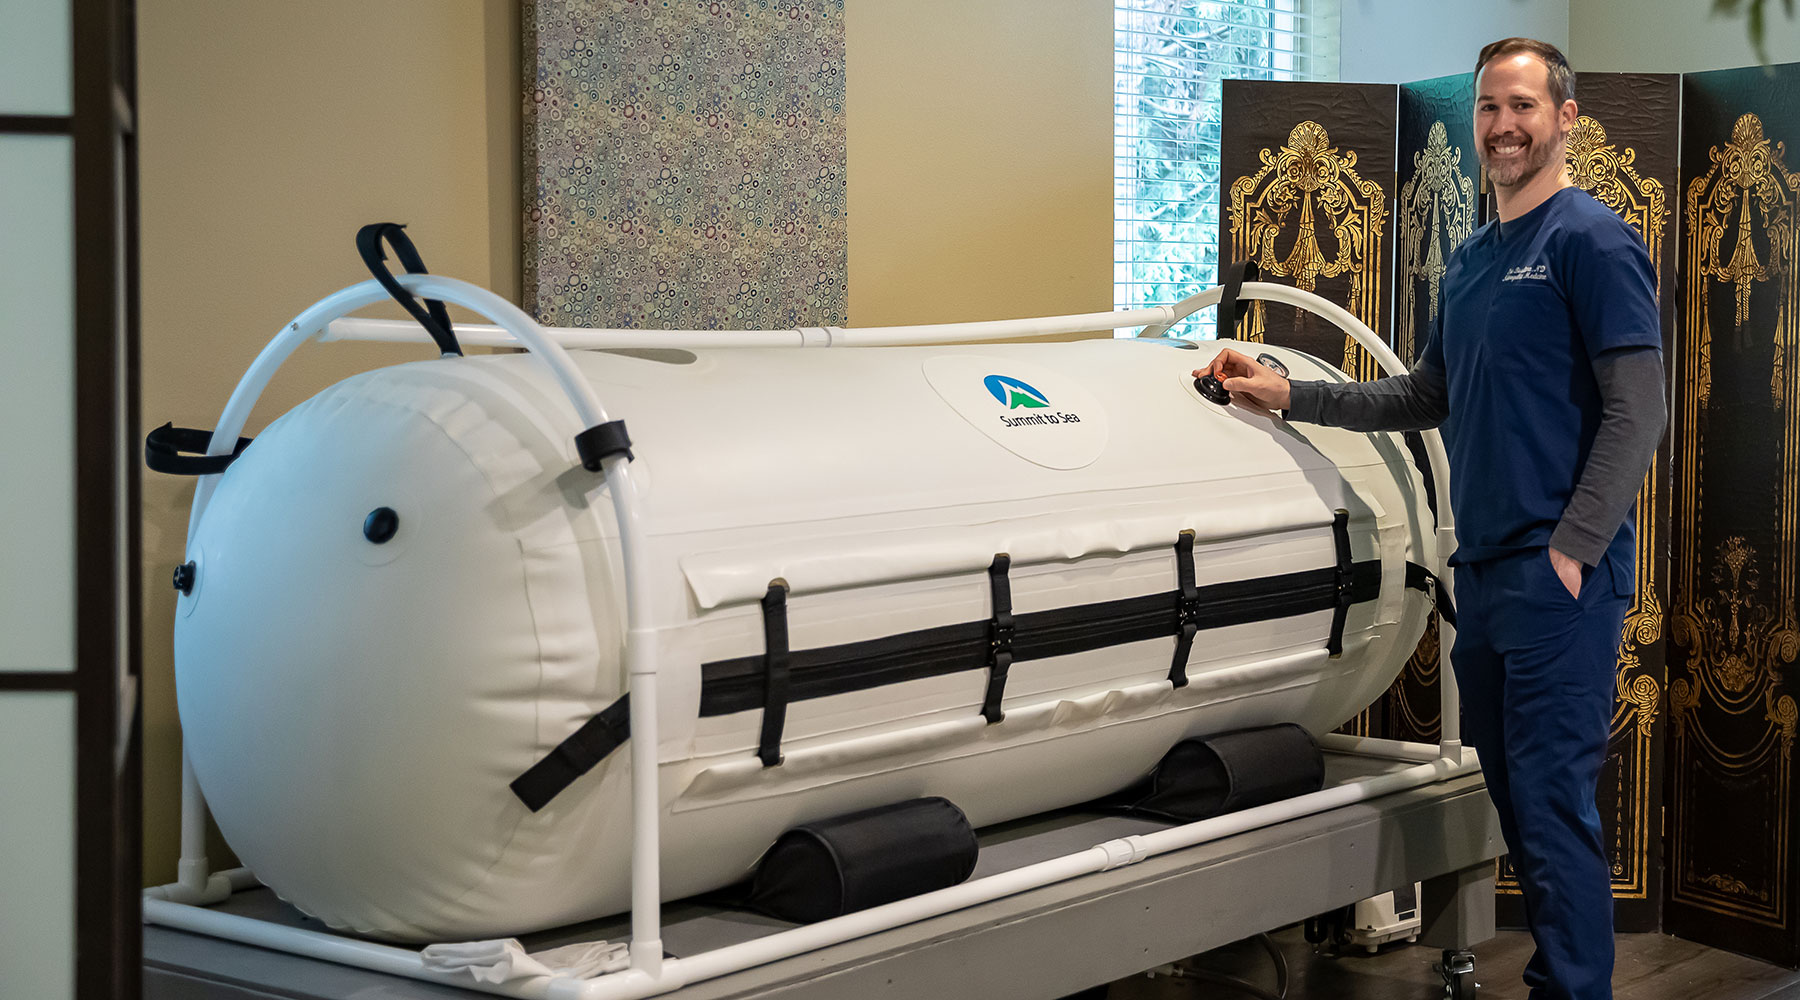 Dr. Eric Basiliere standing in front of the Hyperbaric Oxygen Chamber